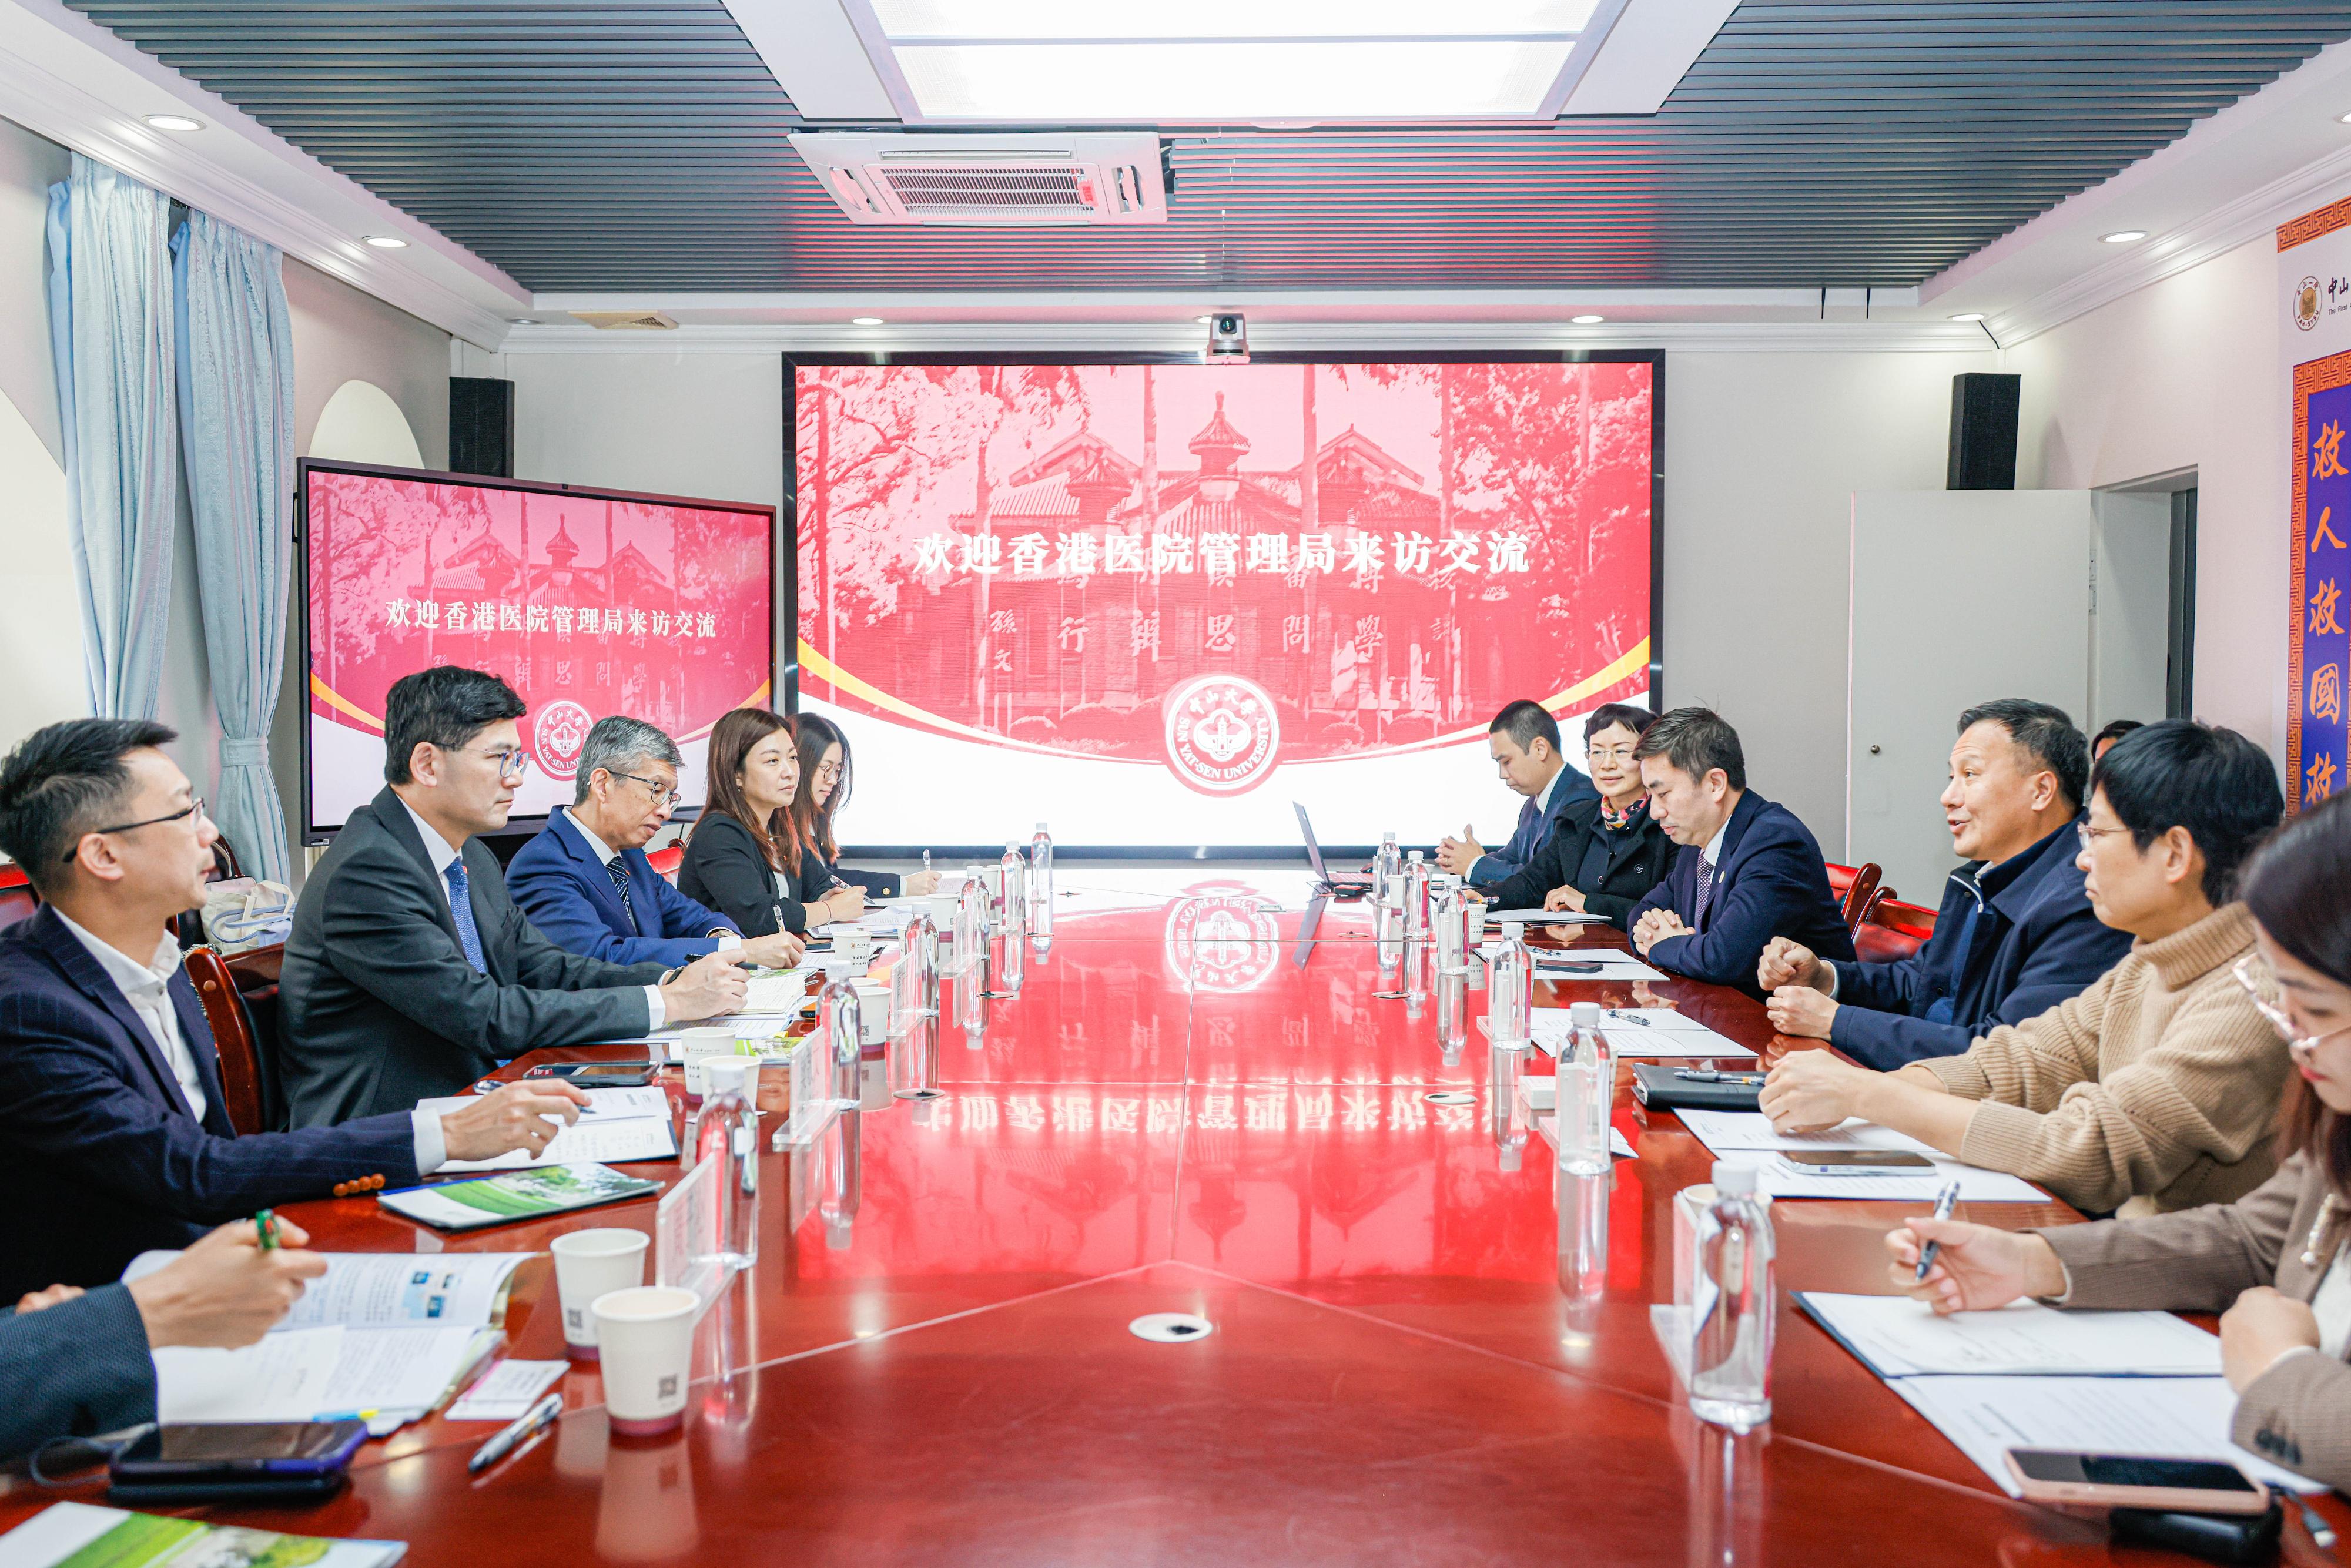 The Hospital Authority delegation had a meeting with the delegation Sun Yat-sen University and its First Affiliated Hospital today (February 23) to explore collaboration opportunities so as to enhance the quality of public healthcare services in Guangdong-Hong Kong-Macao Greater Bay Area.

 

